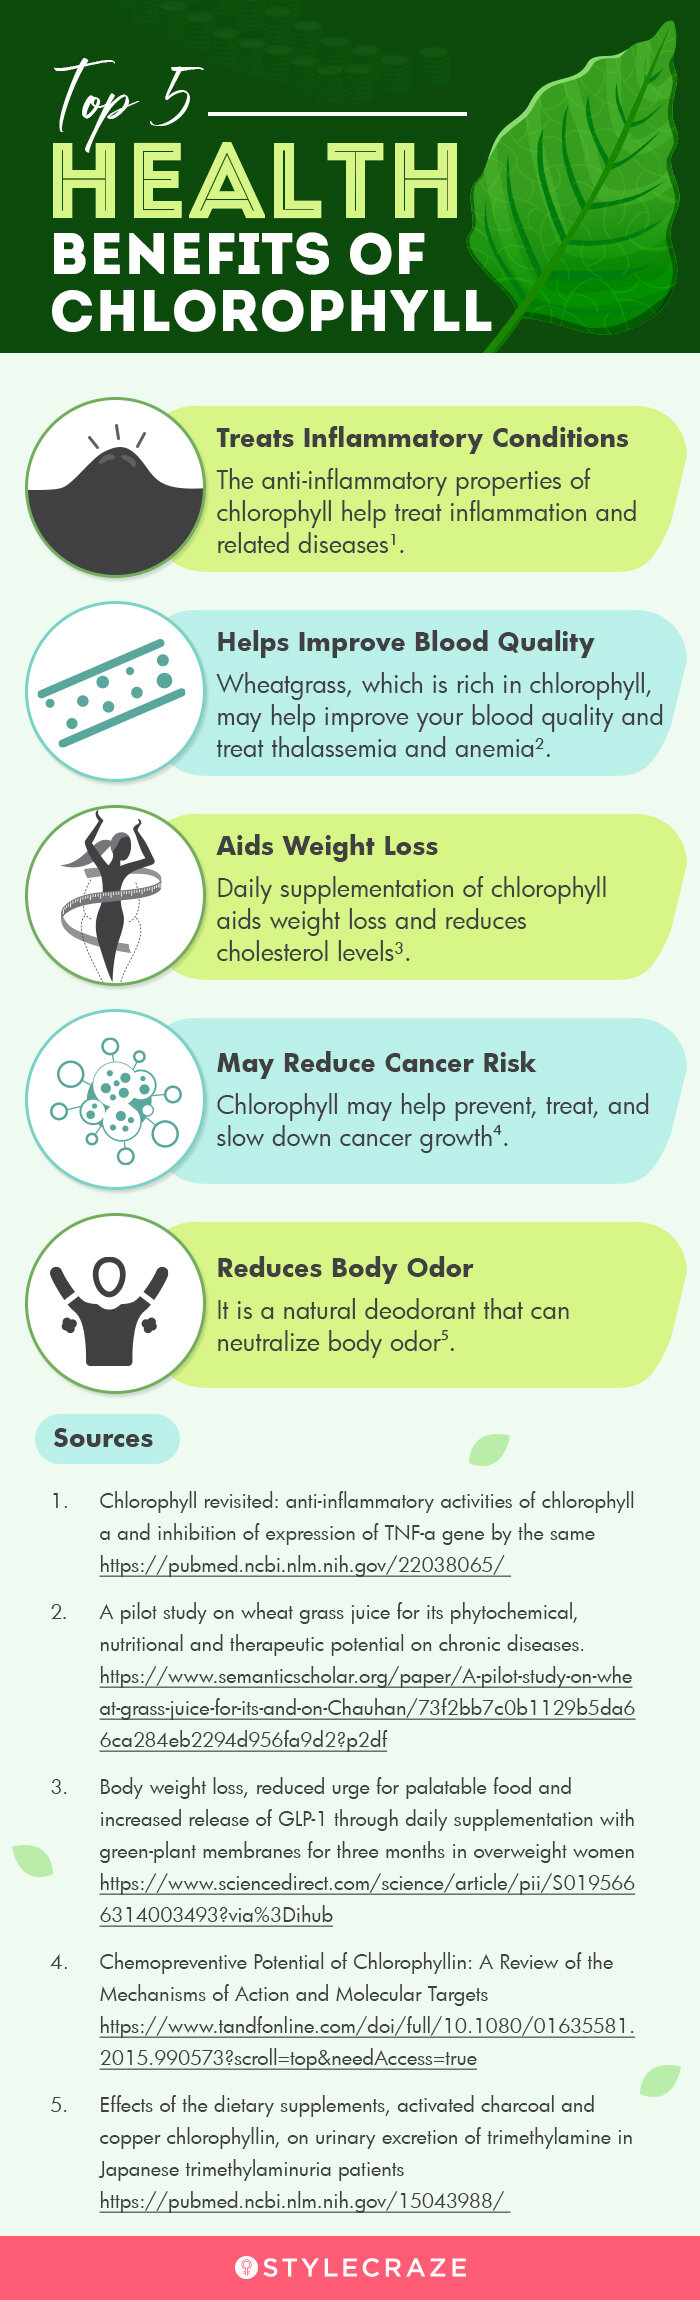 top 5 health benefits of chlorophyll (infographic)